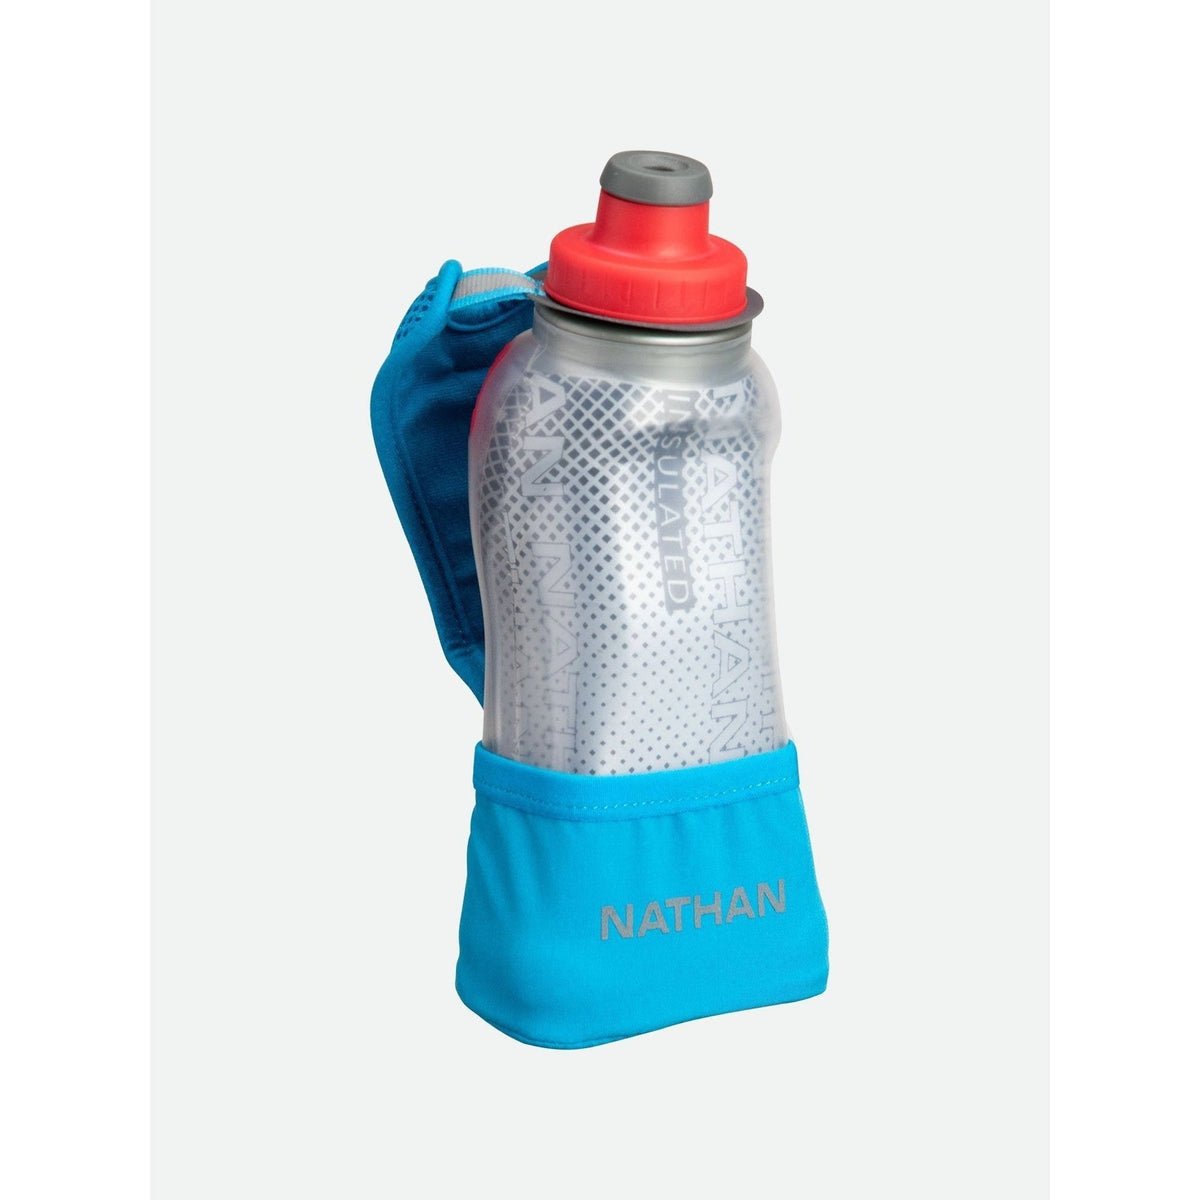 https://cdn.shopify.com/s/files/1/0524/9407/4013/products/Nathan-QuickSqueeze-Lite-12oz-Insulated-Handheld-2_1200x.jpg?v=1656552299